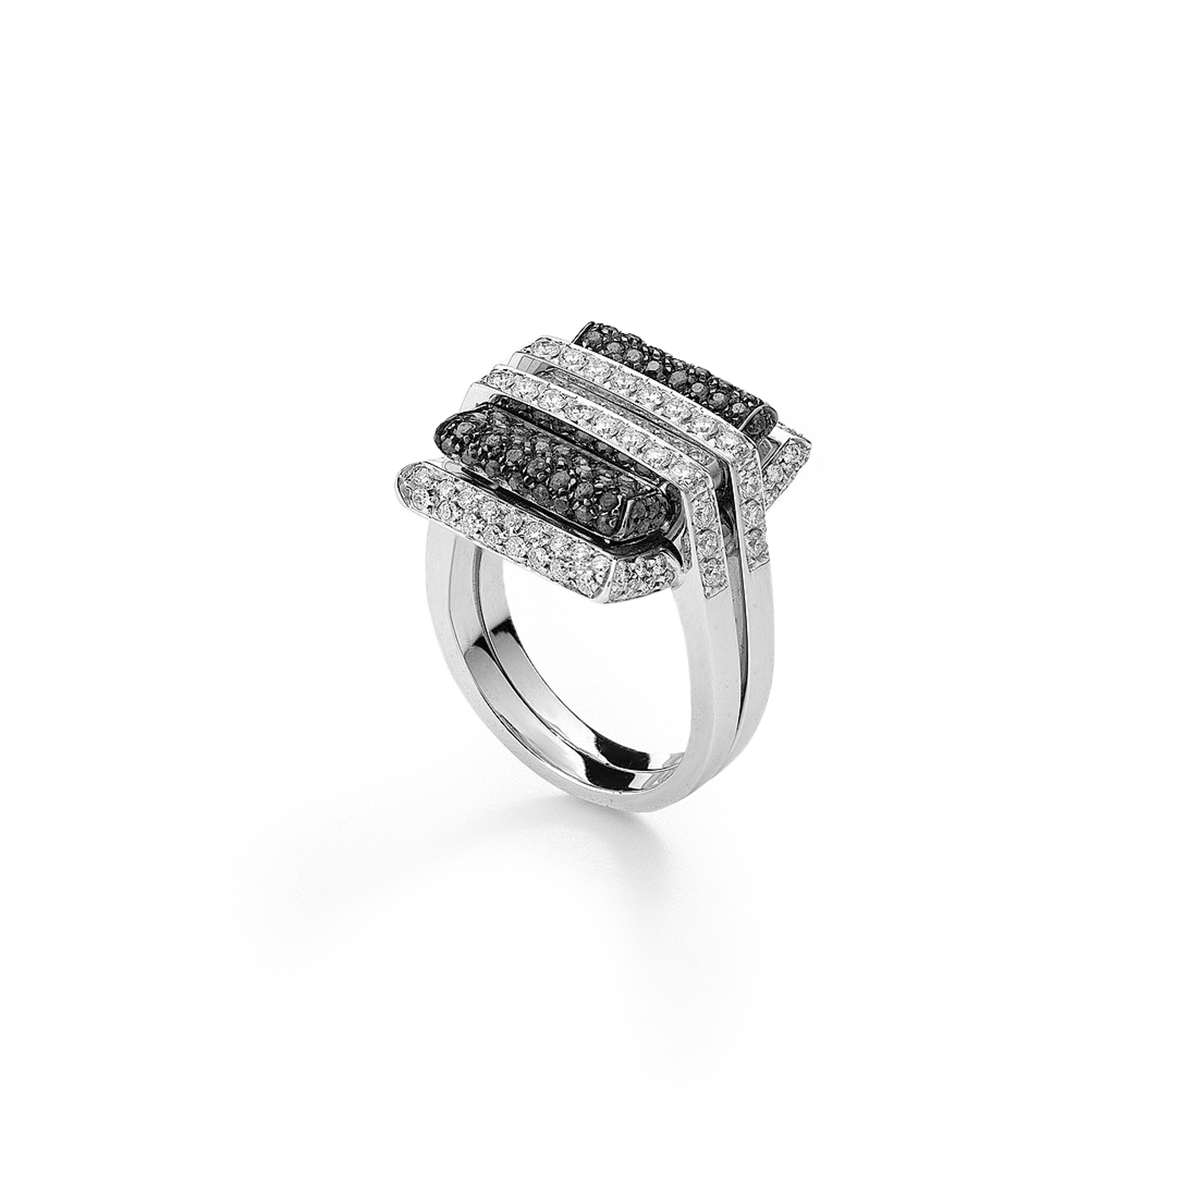 jewels-diamonds-black-and-white-18kt-white-gold-ring